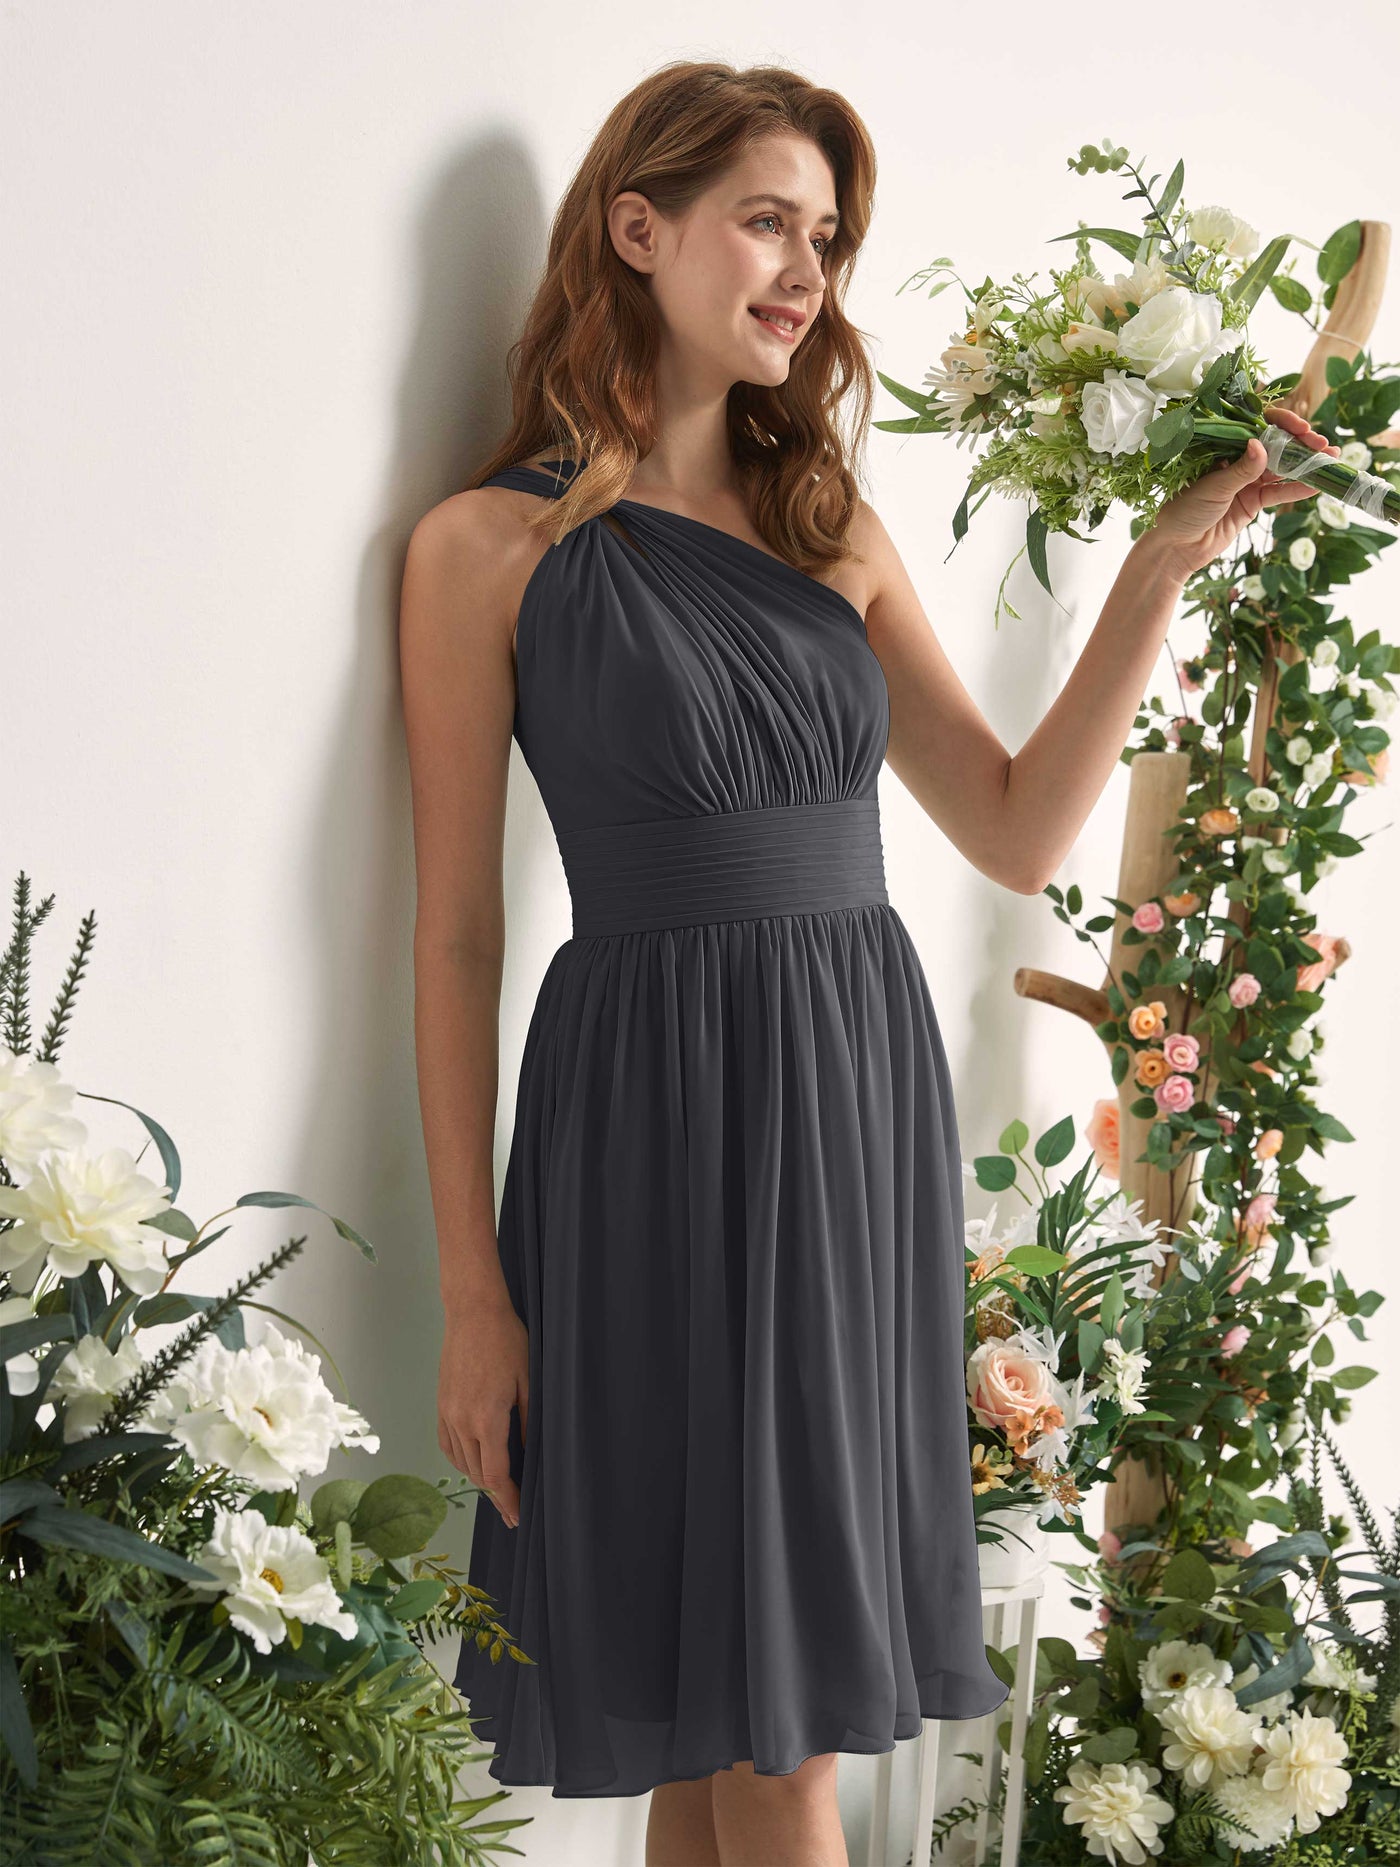 Bridesmaid Dress A-line Chiffon One Shoulder Knee Length Sleeveless Wedding Party Dress - Pewter (81221238)#color_pewter